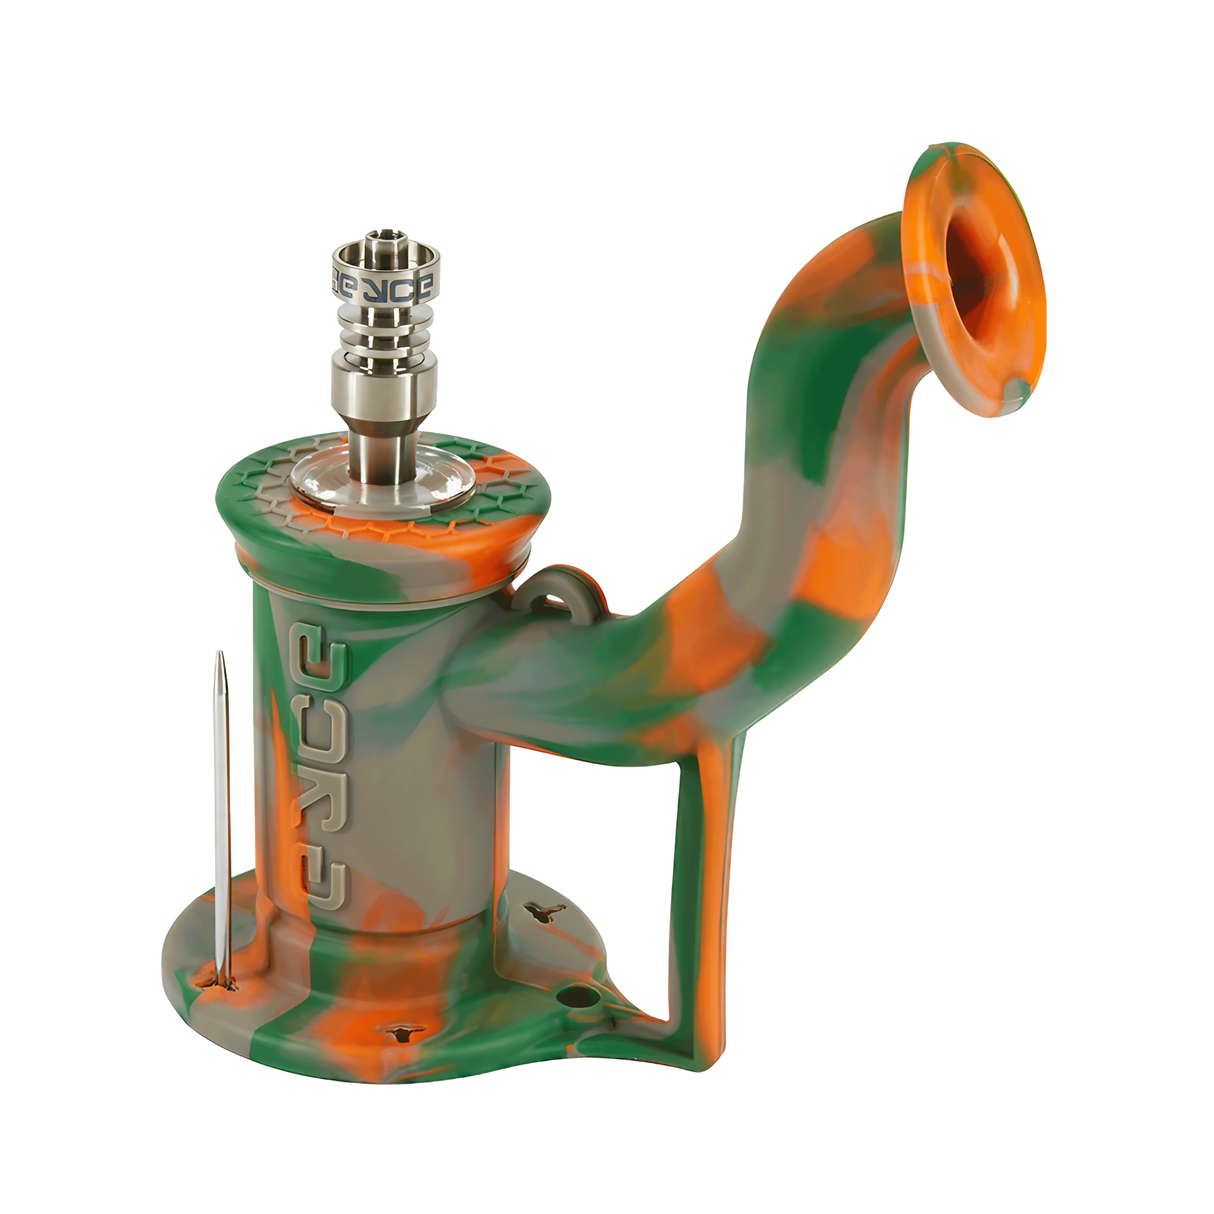 EYCE Rig 2.0 Silicone Dab Rig in Rifle Camo Orange/Green with Titanium Nail - Angled View